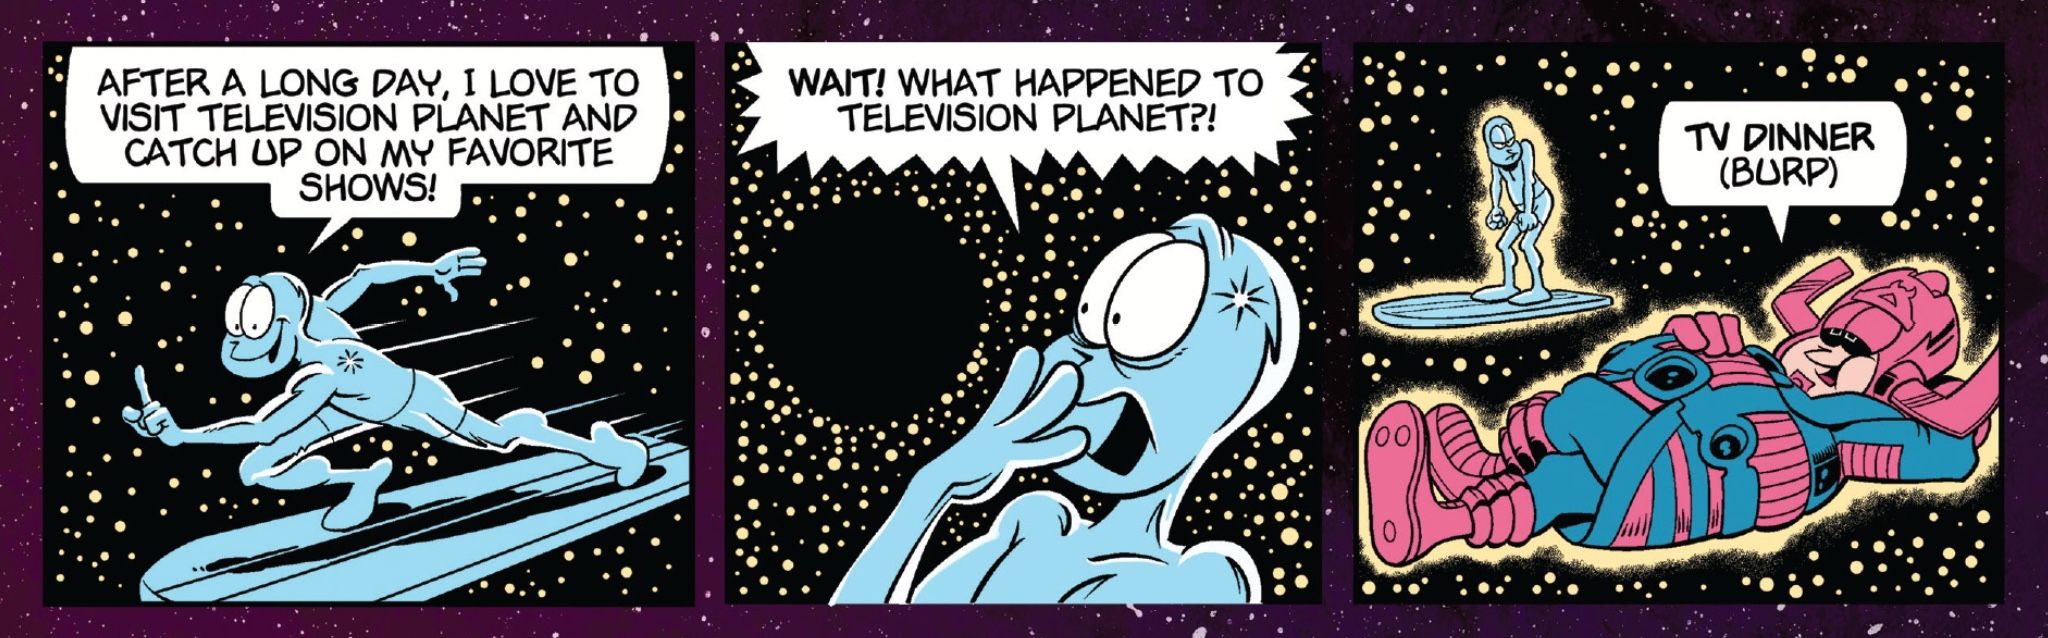 Silver Surfer: After a Long Day, I love to visit Television Planet and catch up on my favorite shows. WAIT! What happened to Television Planet? Galactus: TV Dinner (Burp)